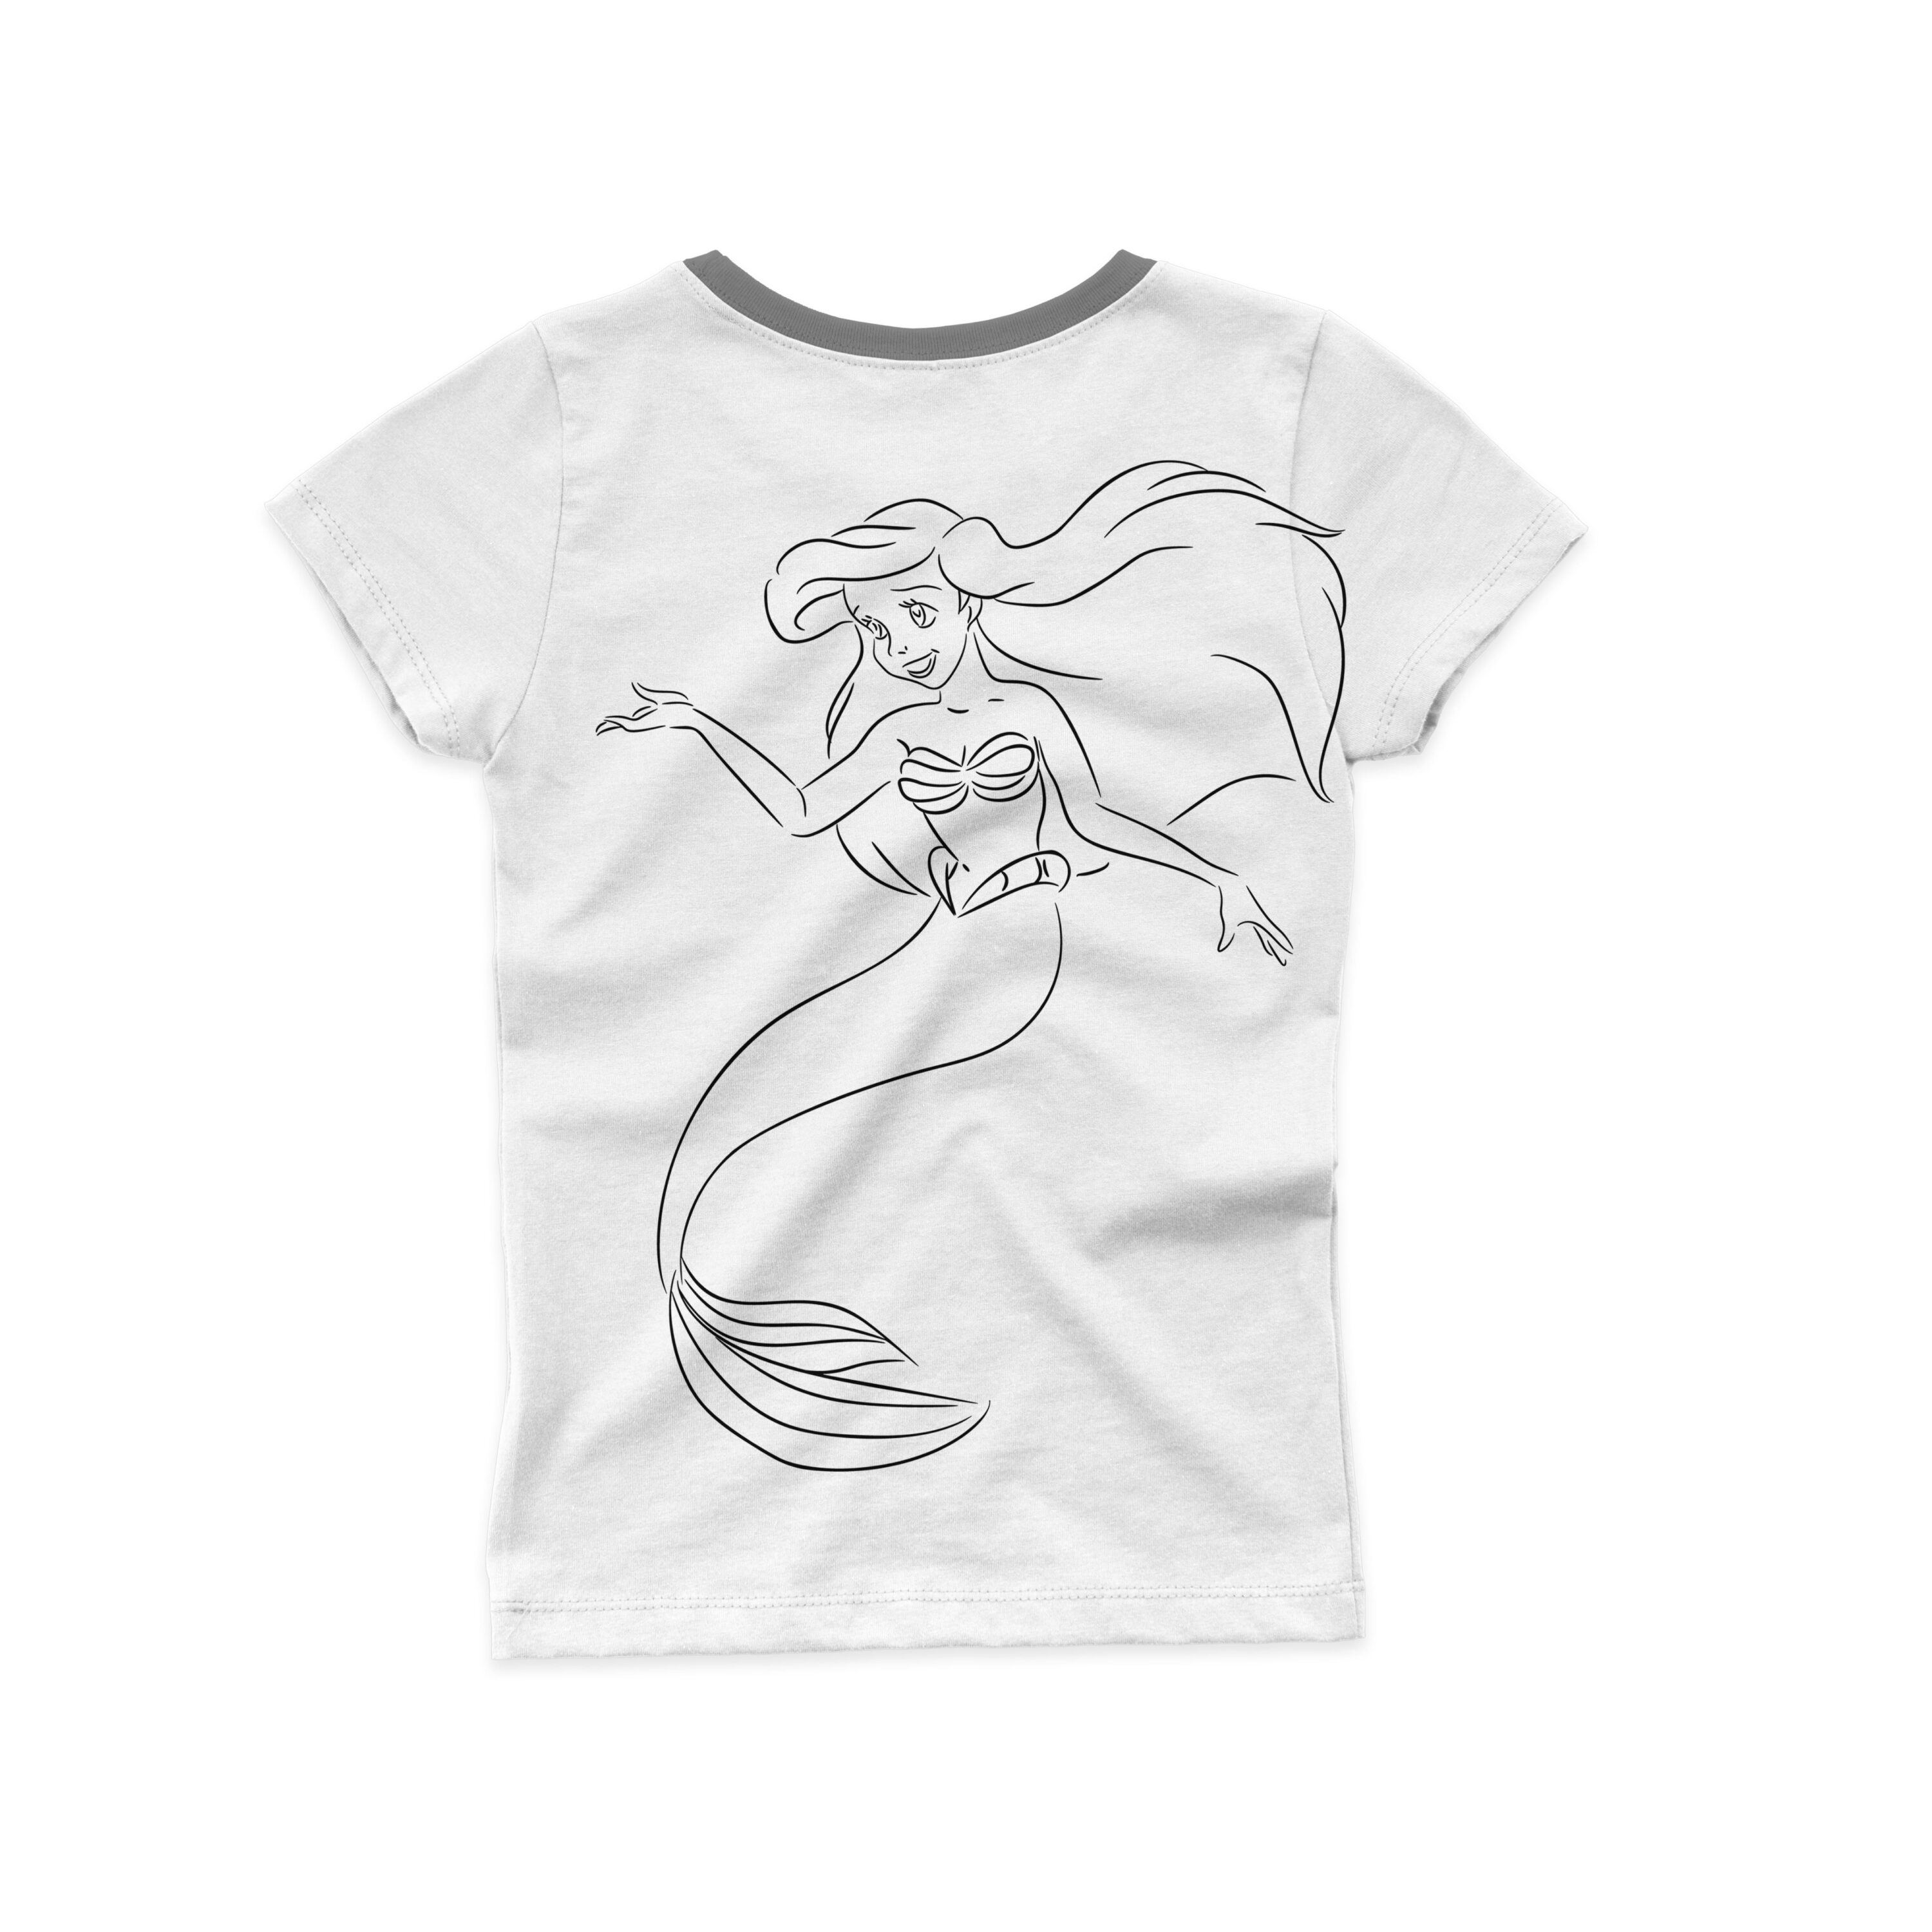 Awesome t-shirt prints with tails and more.